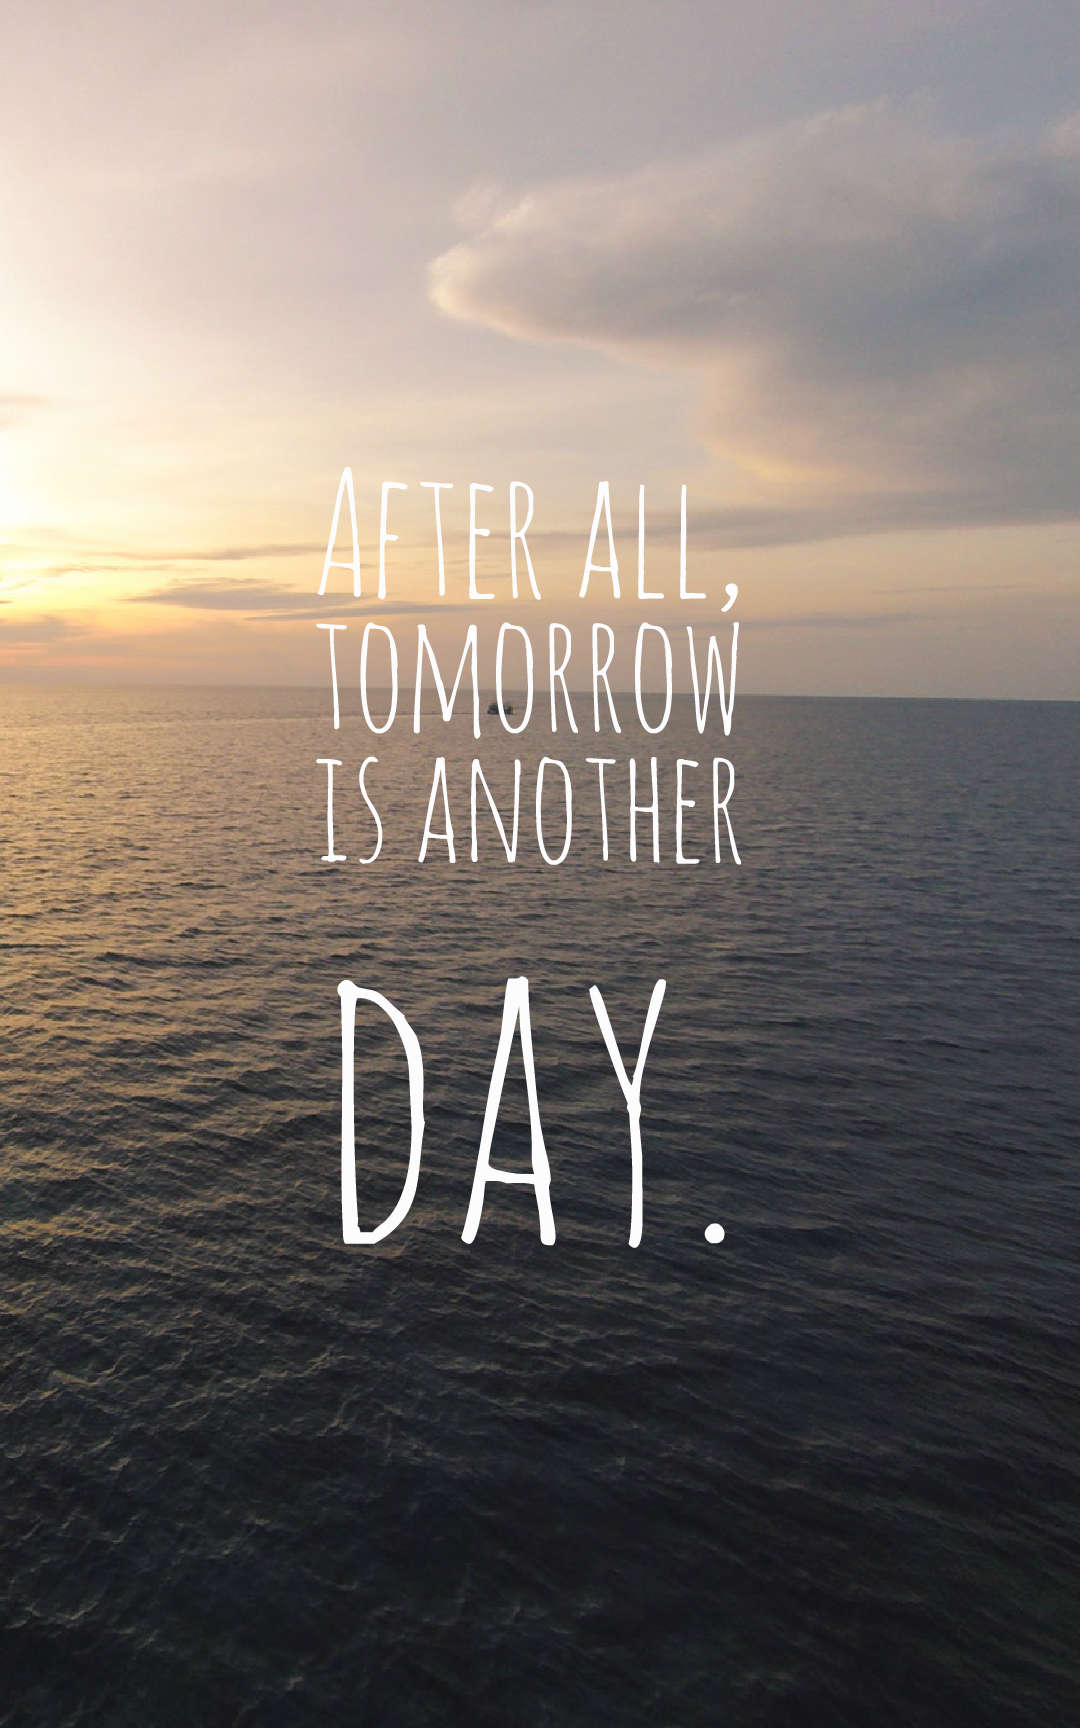 After all, tomorrow is another day.